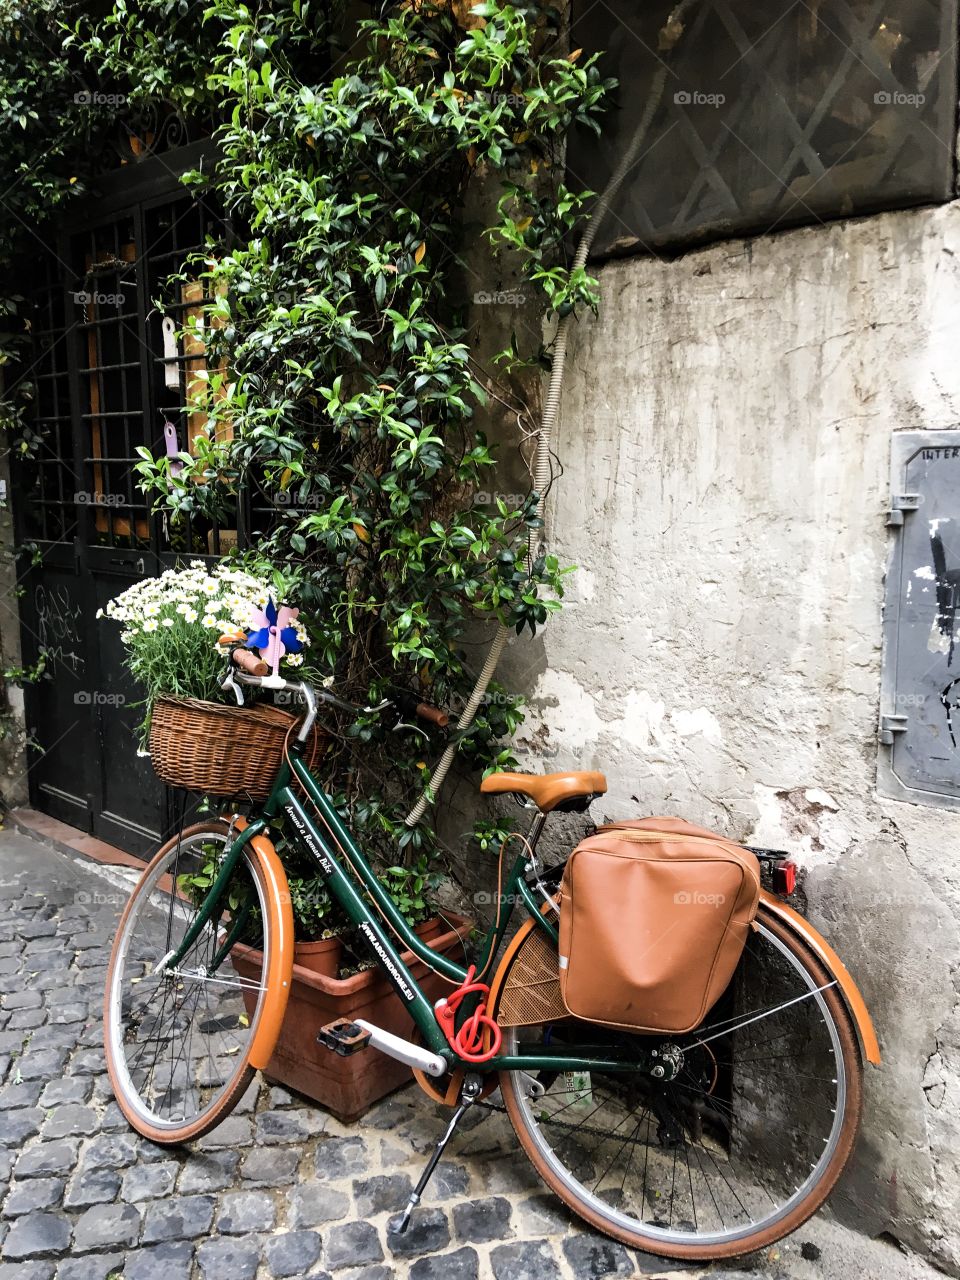 The bicycle with a flower basket. Roma. Italy. 